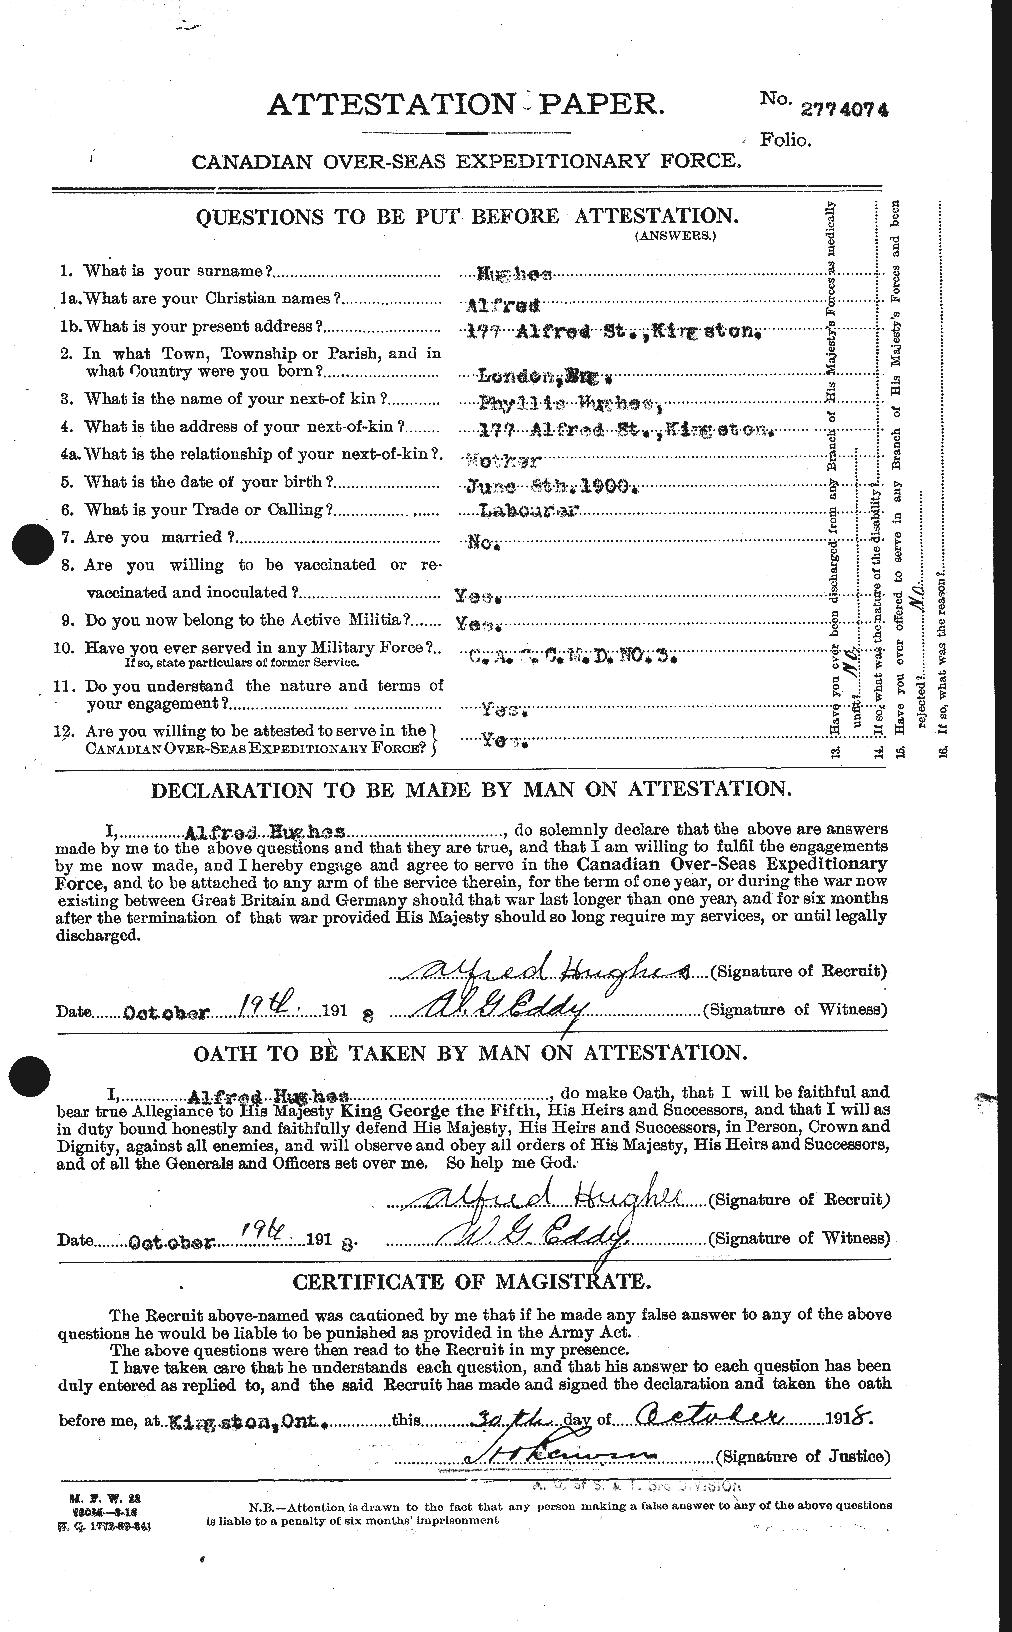 Personnel Records of the First World War - CEF 402537a